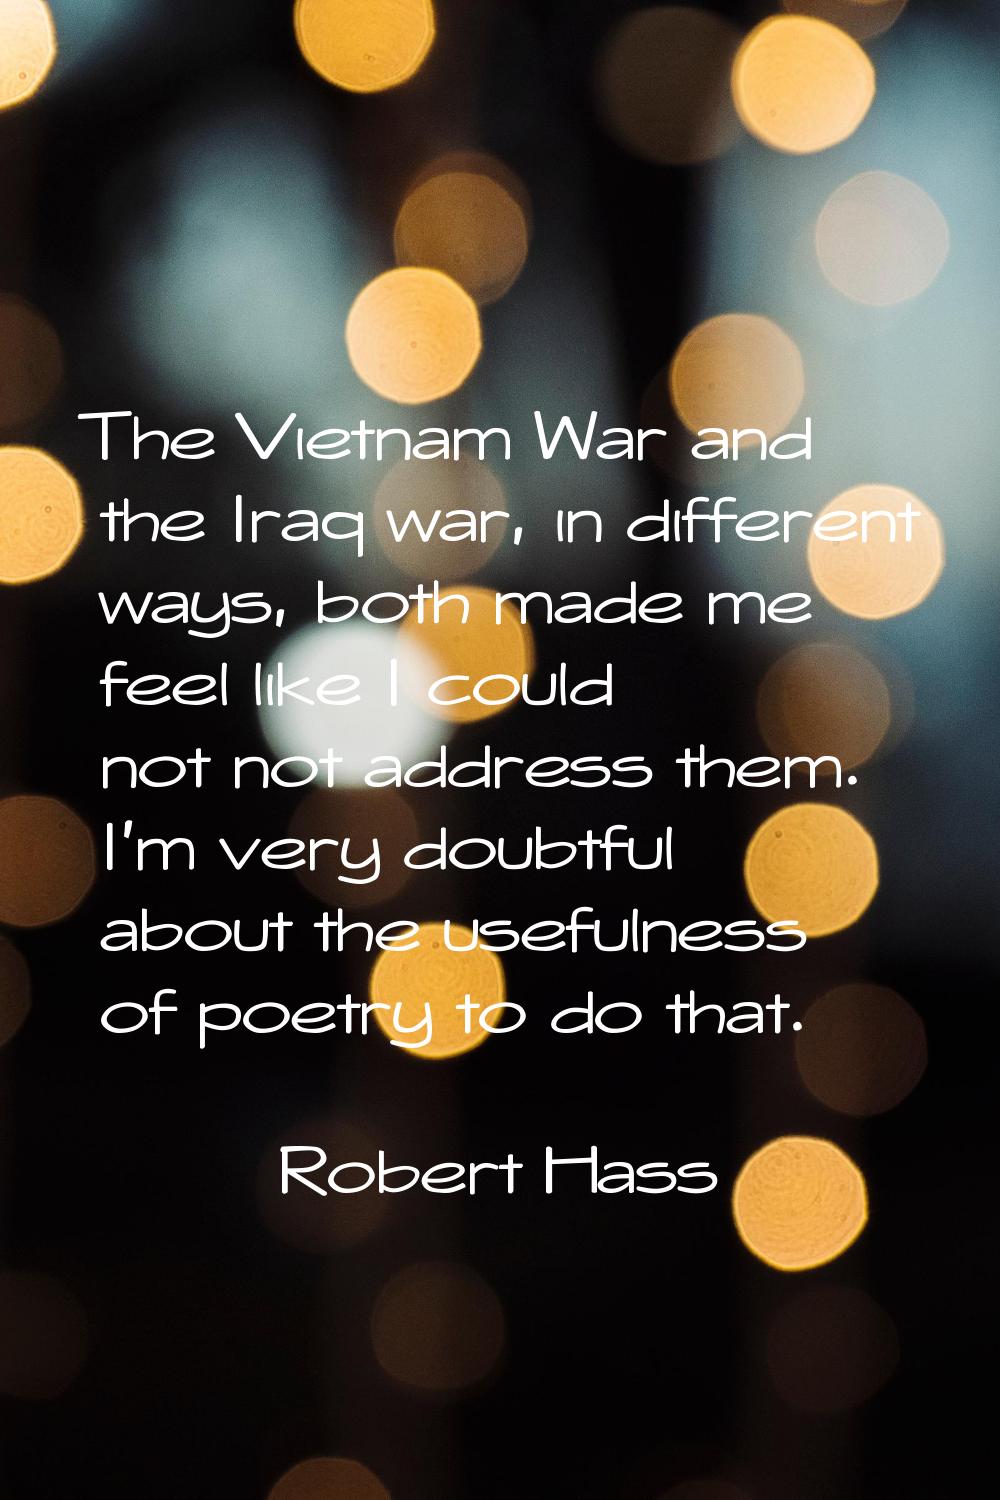 The Vietnam War and the Iraq war, in different ways, both made me feel like I could not not address